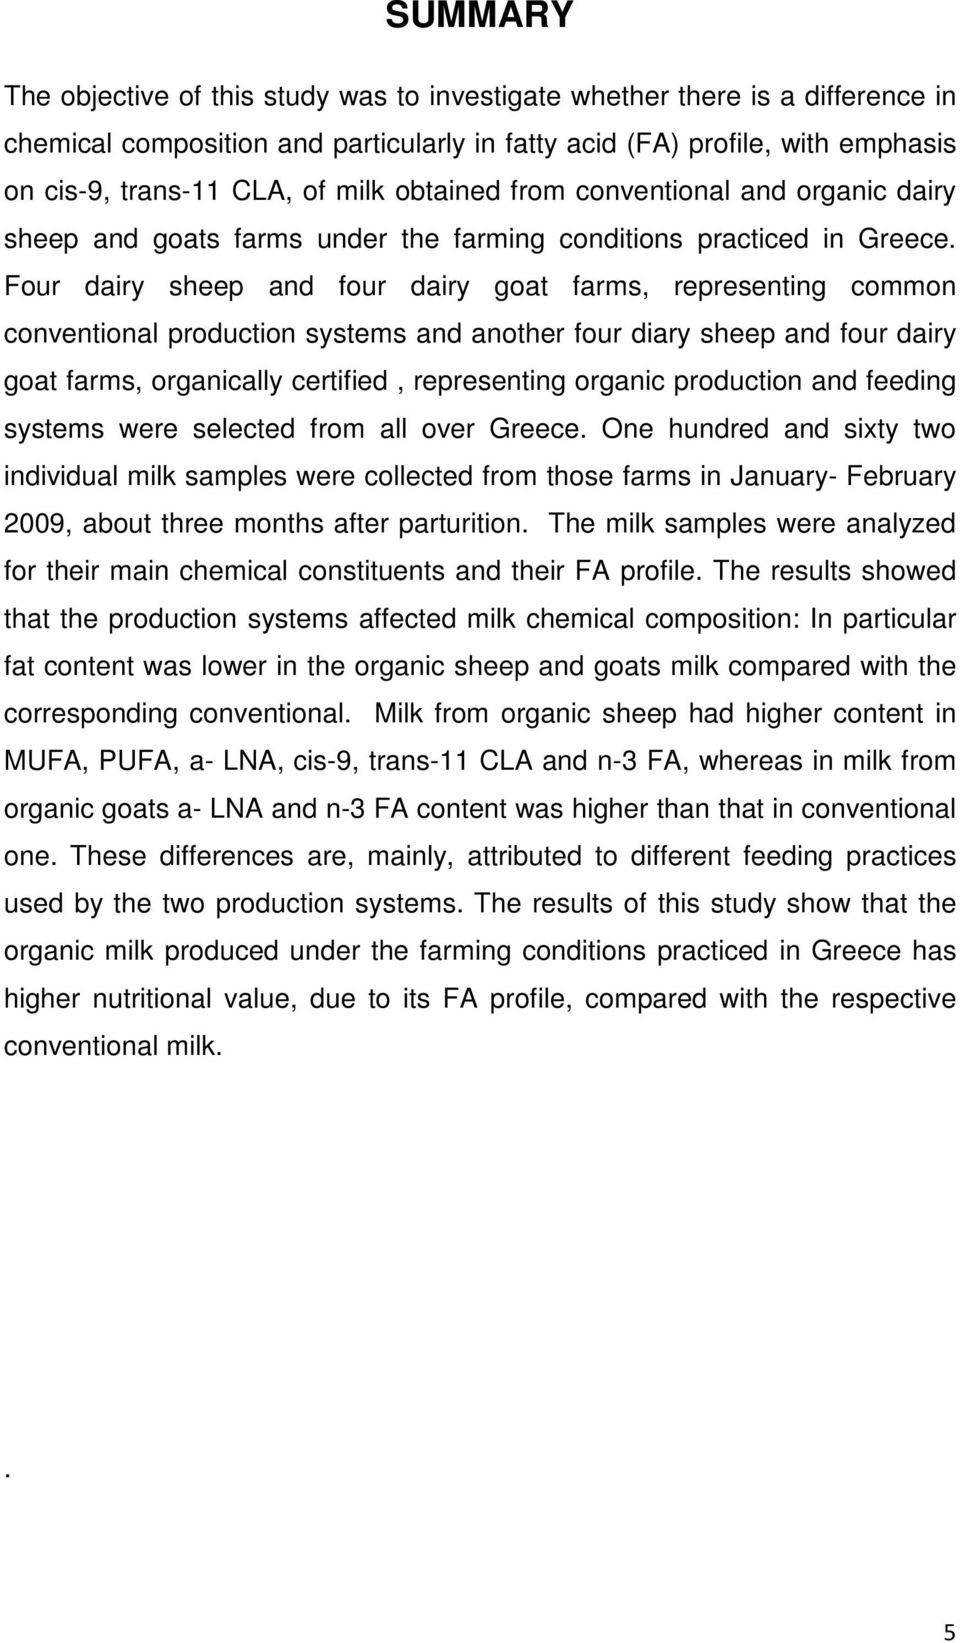 Four dairy sheep and four dairy goat farms, representing common conventional production systems and another four diary sheep and four dairy goat farms, organically certified, representing organic